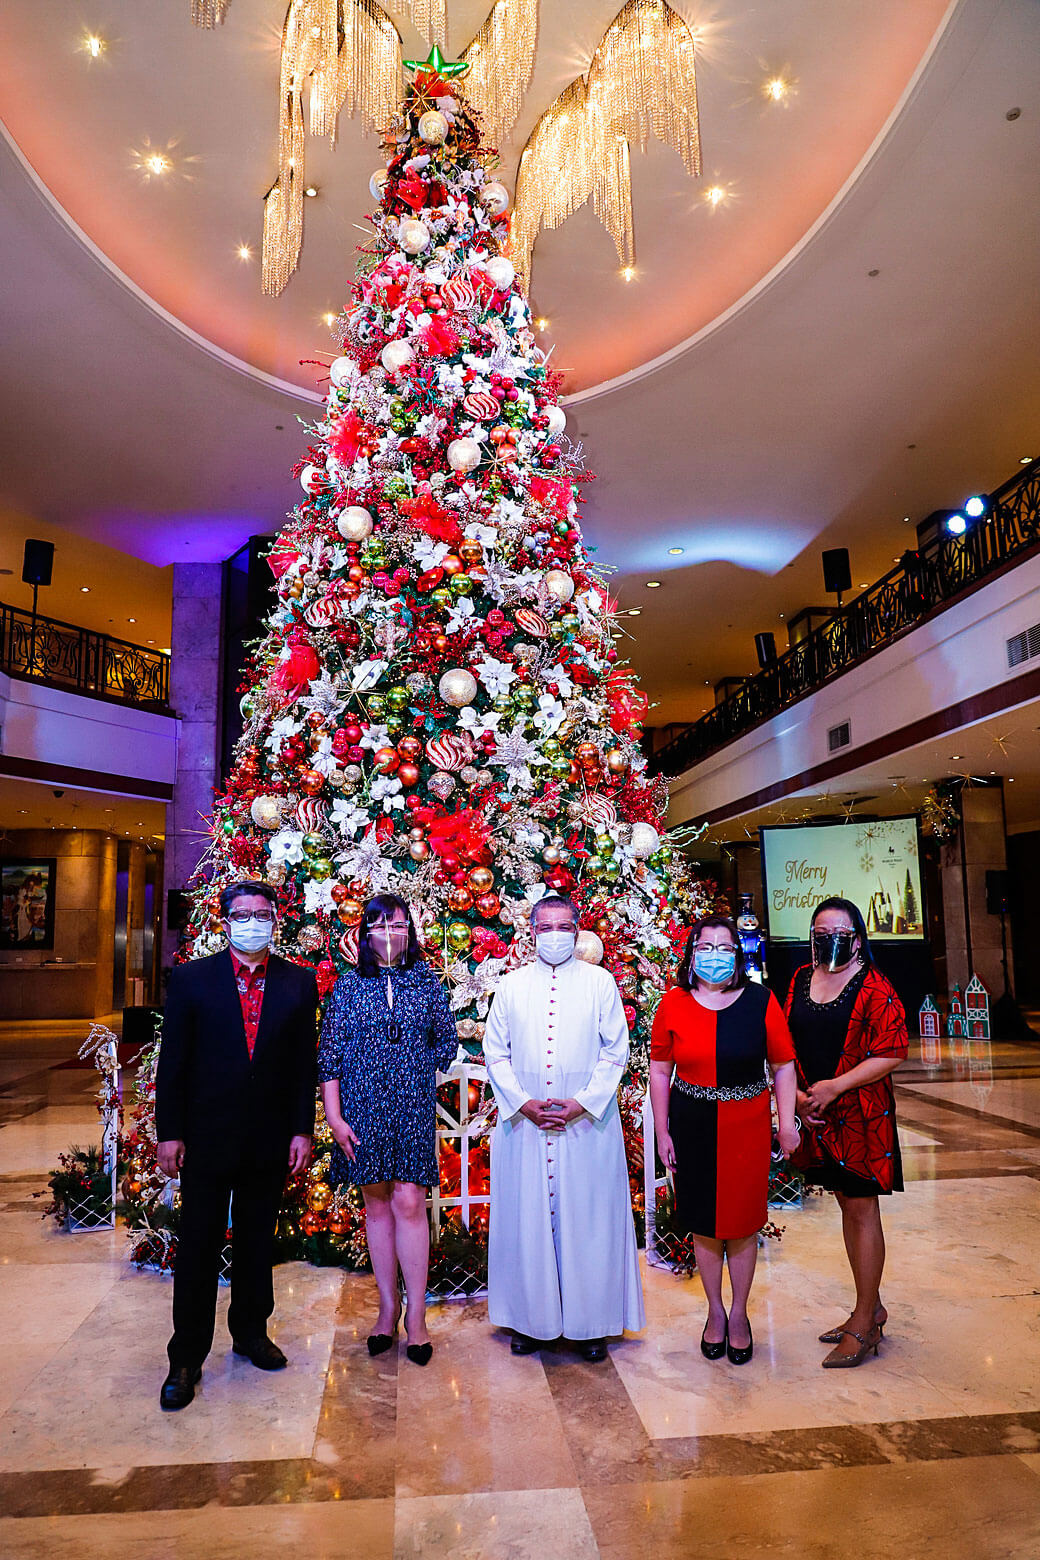 TREE OF HOPE. At the Tree of Hope in the hotel lobby are (from left) Jude Pangan, Jude Pangan, Ann Marie Tan, Msgr. Jim Gorre, Lara Scarrow, and Amabelle Russiana.